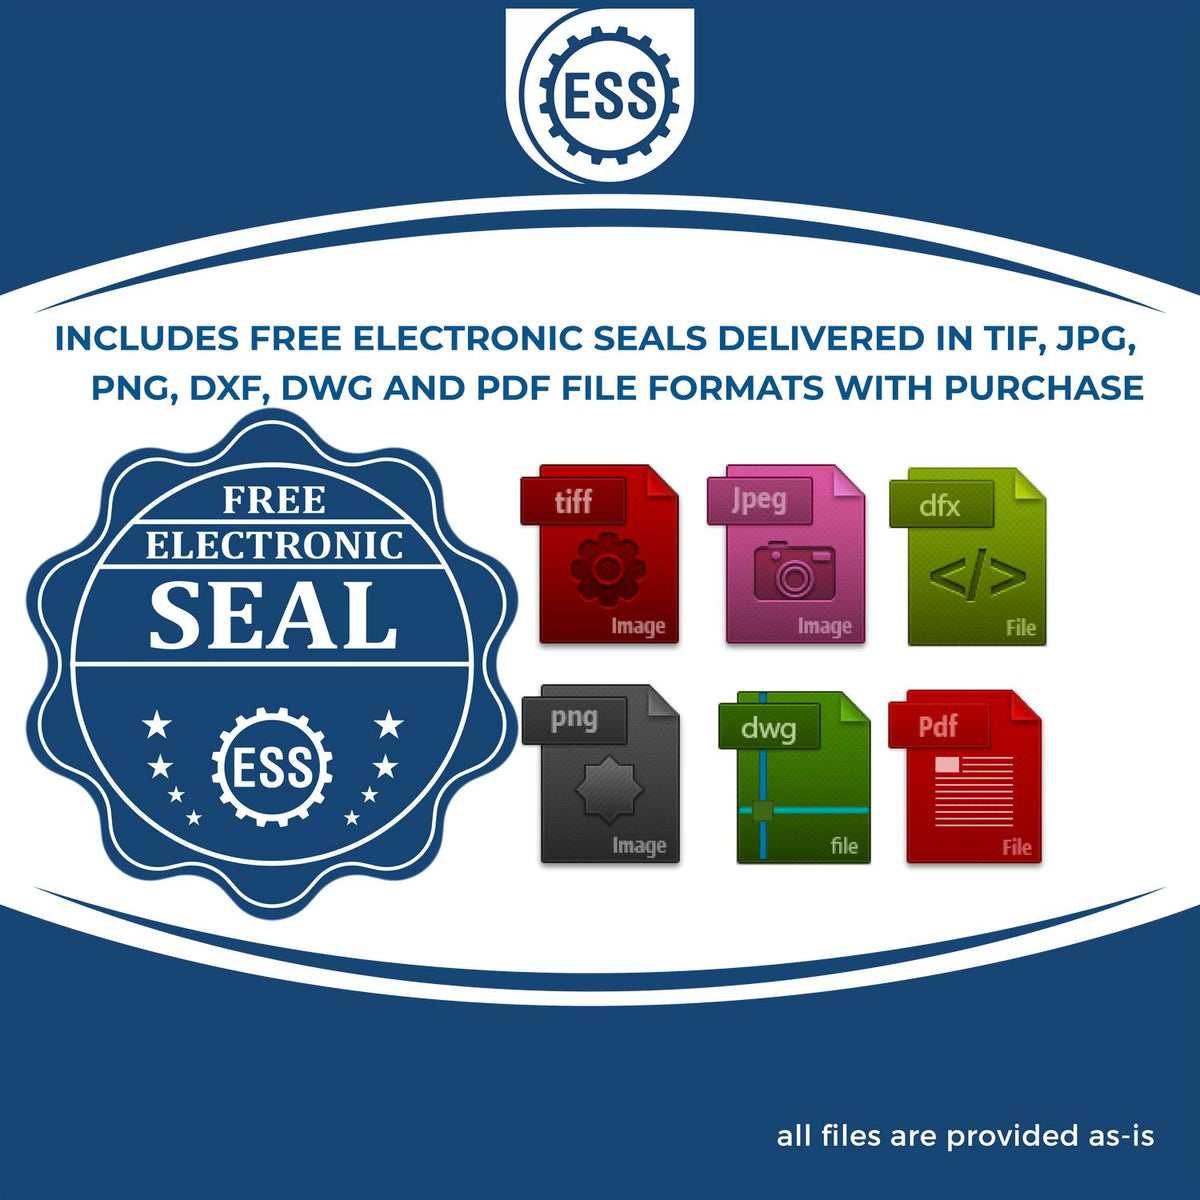 An infographic for the free electronic seal for the Louisiana Professional Engineer Seal Stamp illustrating the different file type icons such as DXF, DWG, TIF, JPG and PNG.